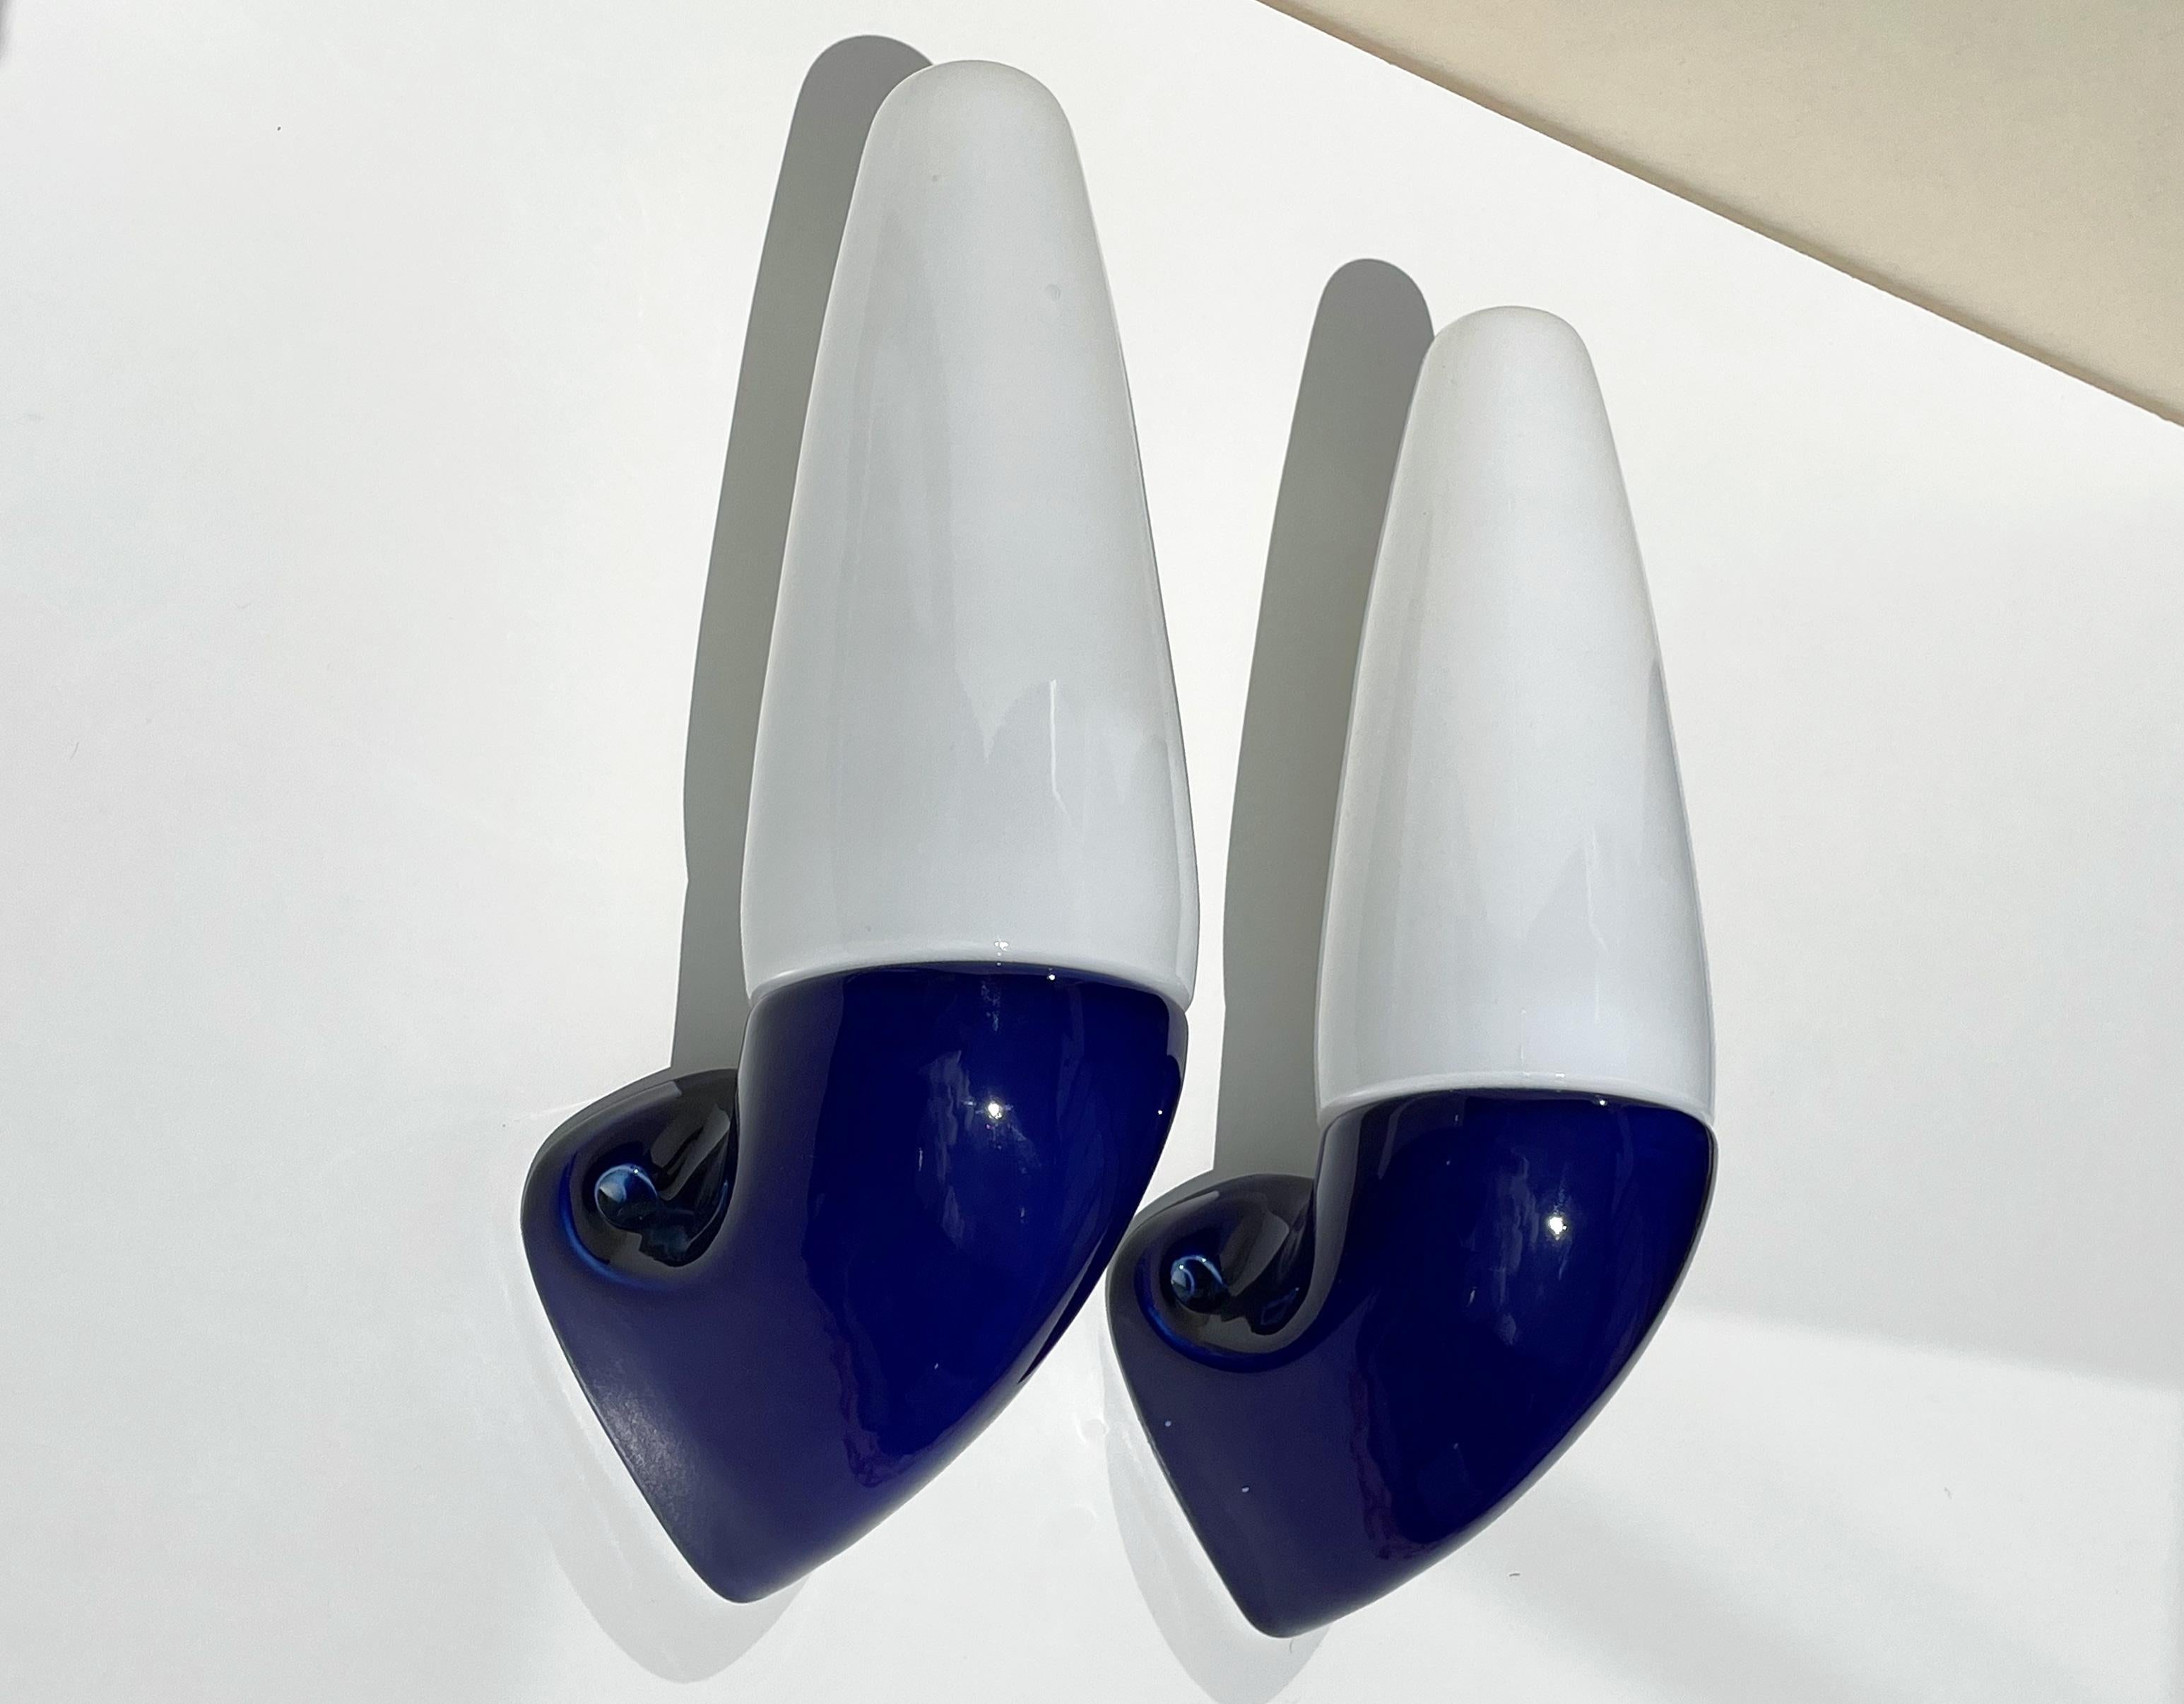 Set of two Swedish midcentury modern vintage wall sconces designed by artistic director for Ifö, Stig Carlsson (1932-2008) in the early 1960s. Shiny cobalt blue glazed mount with cone shaped white opaline glass top. Original porcelain fitting for